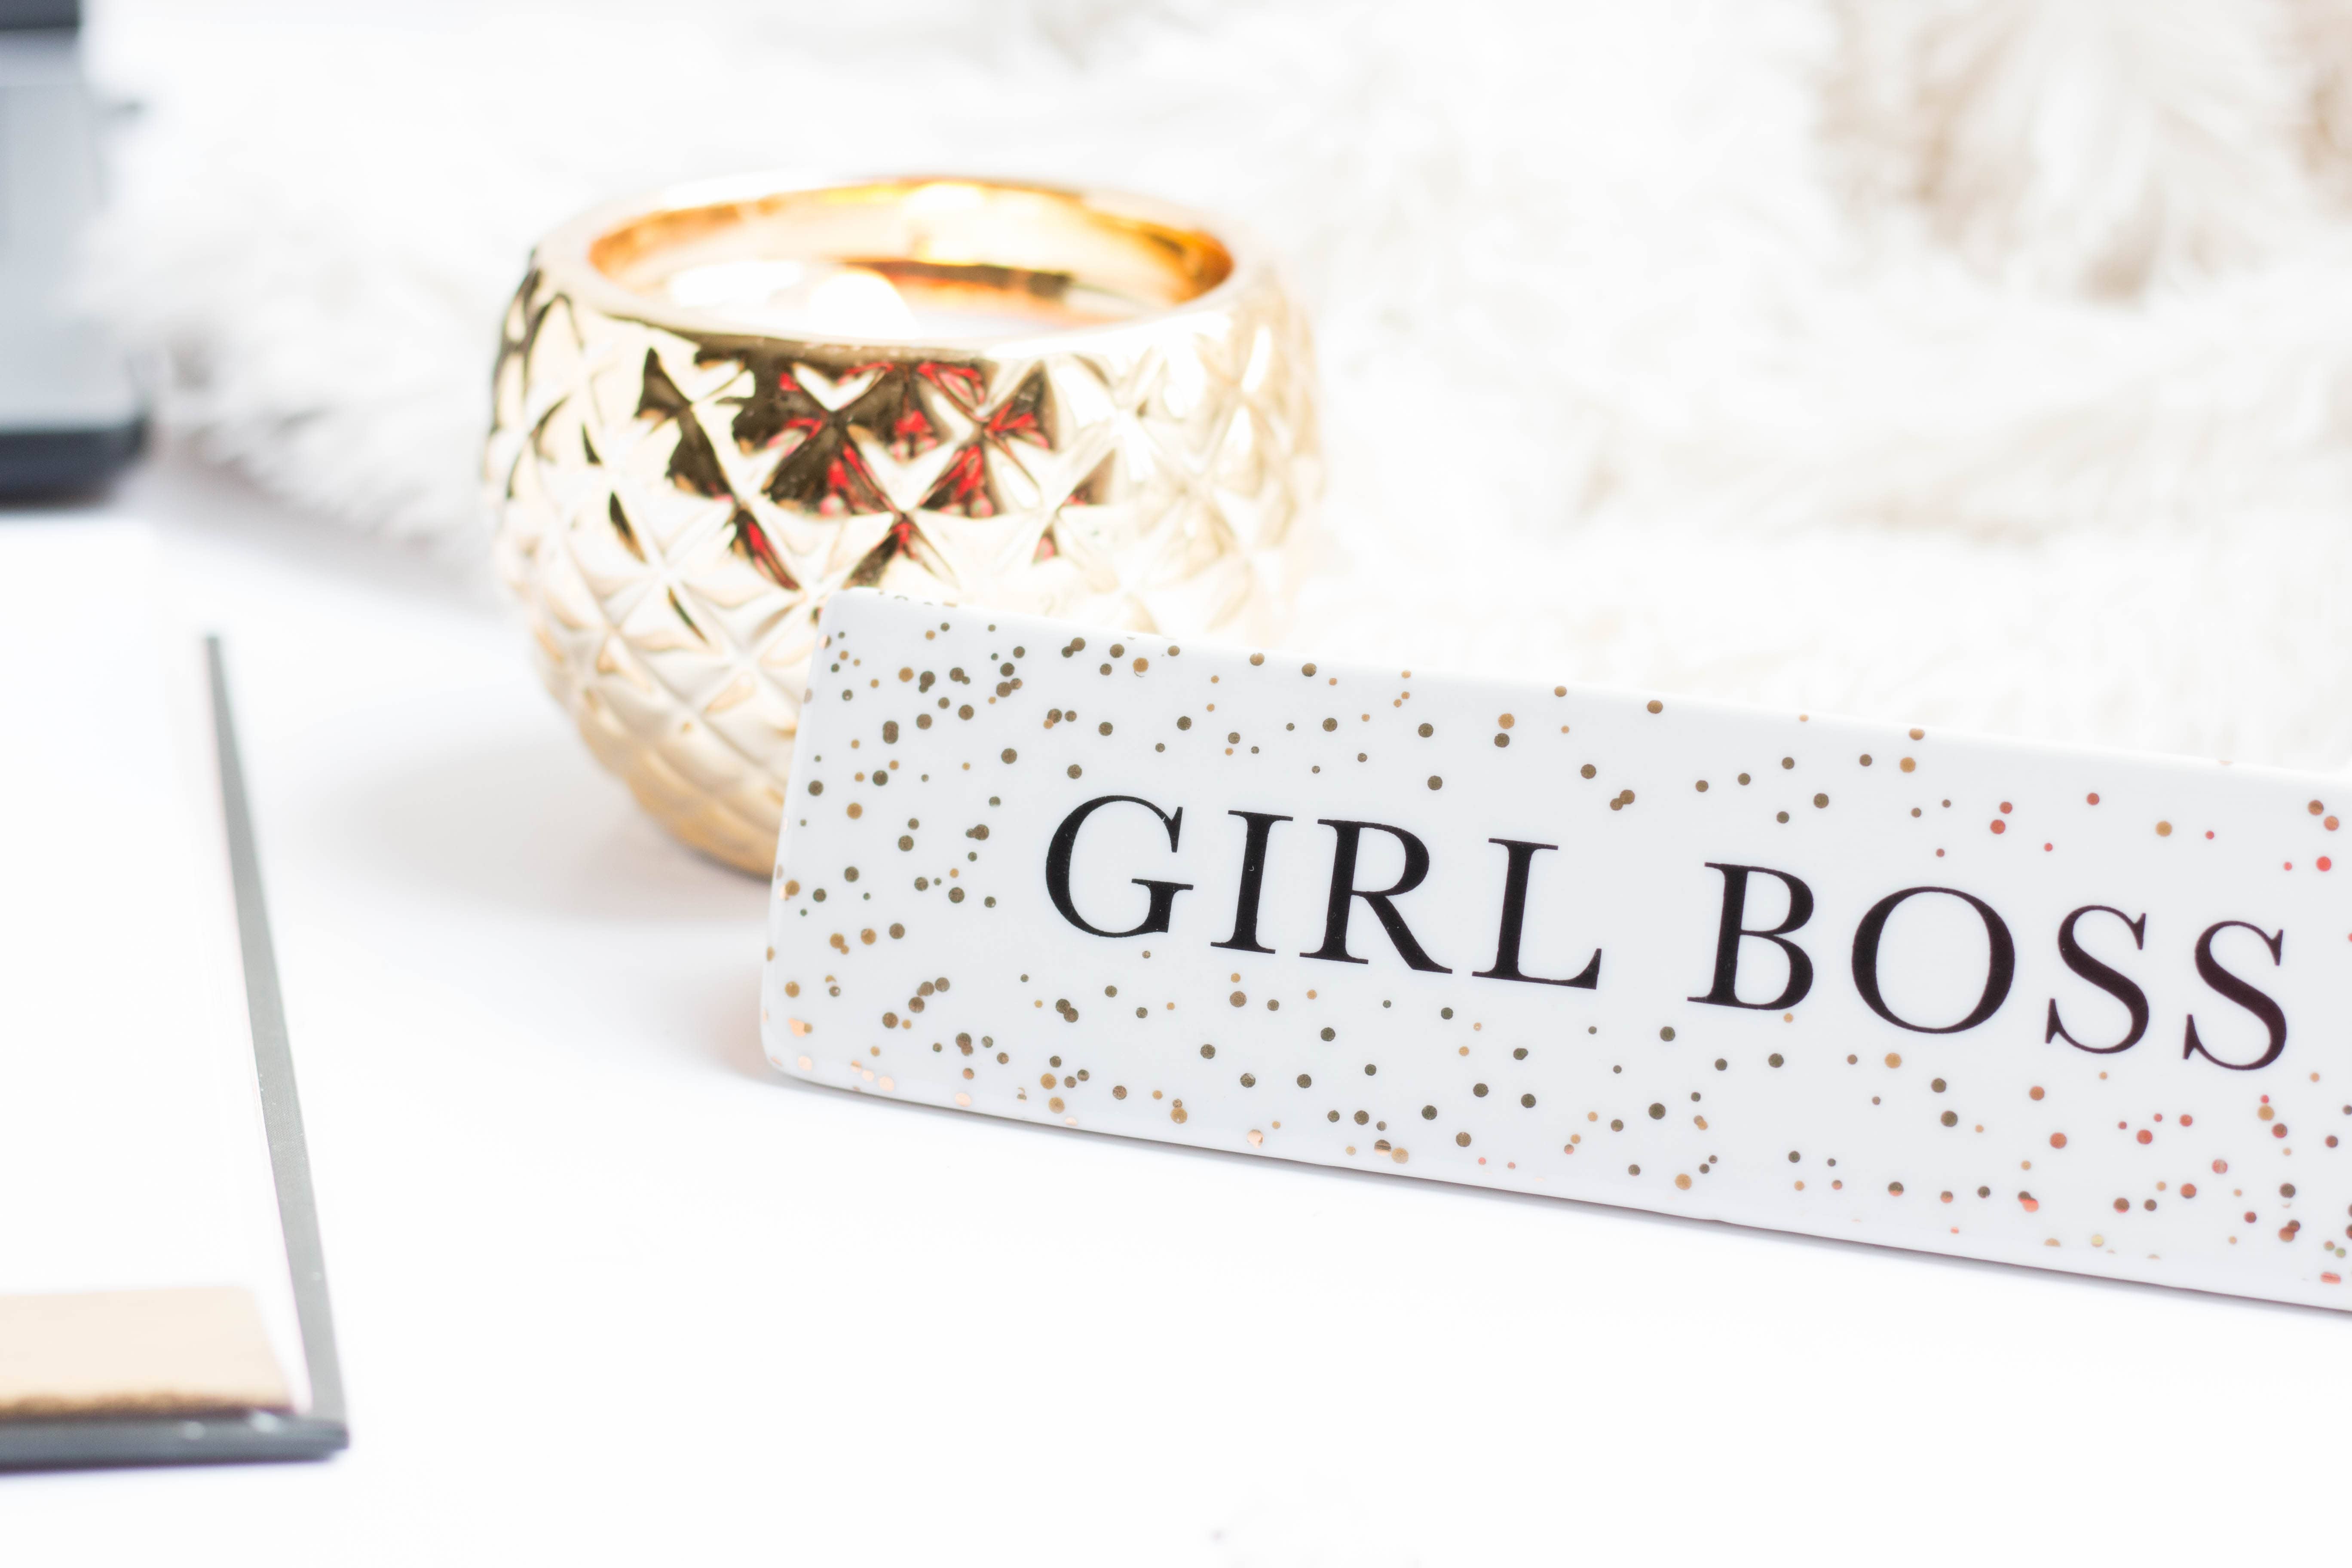 Christmas gift guide for lady bosses and women in business.